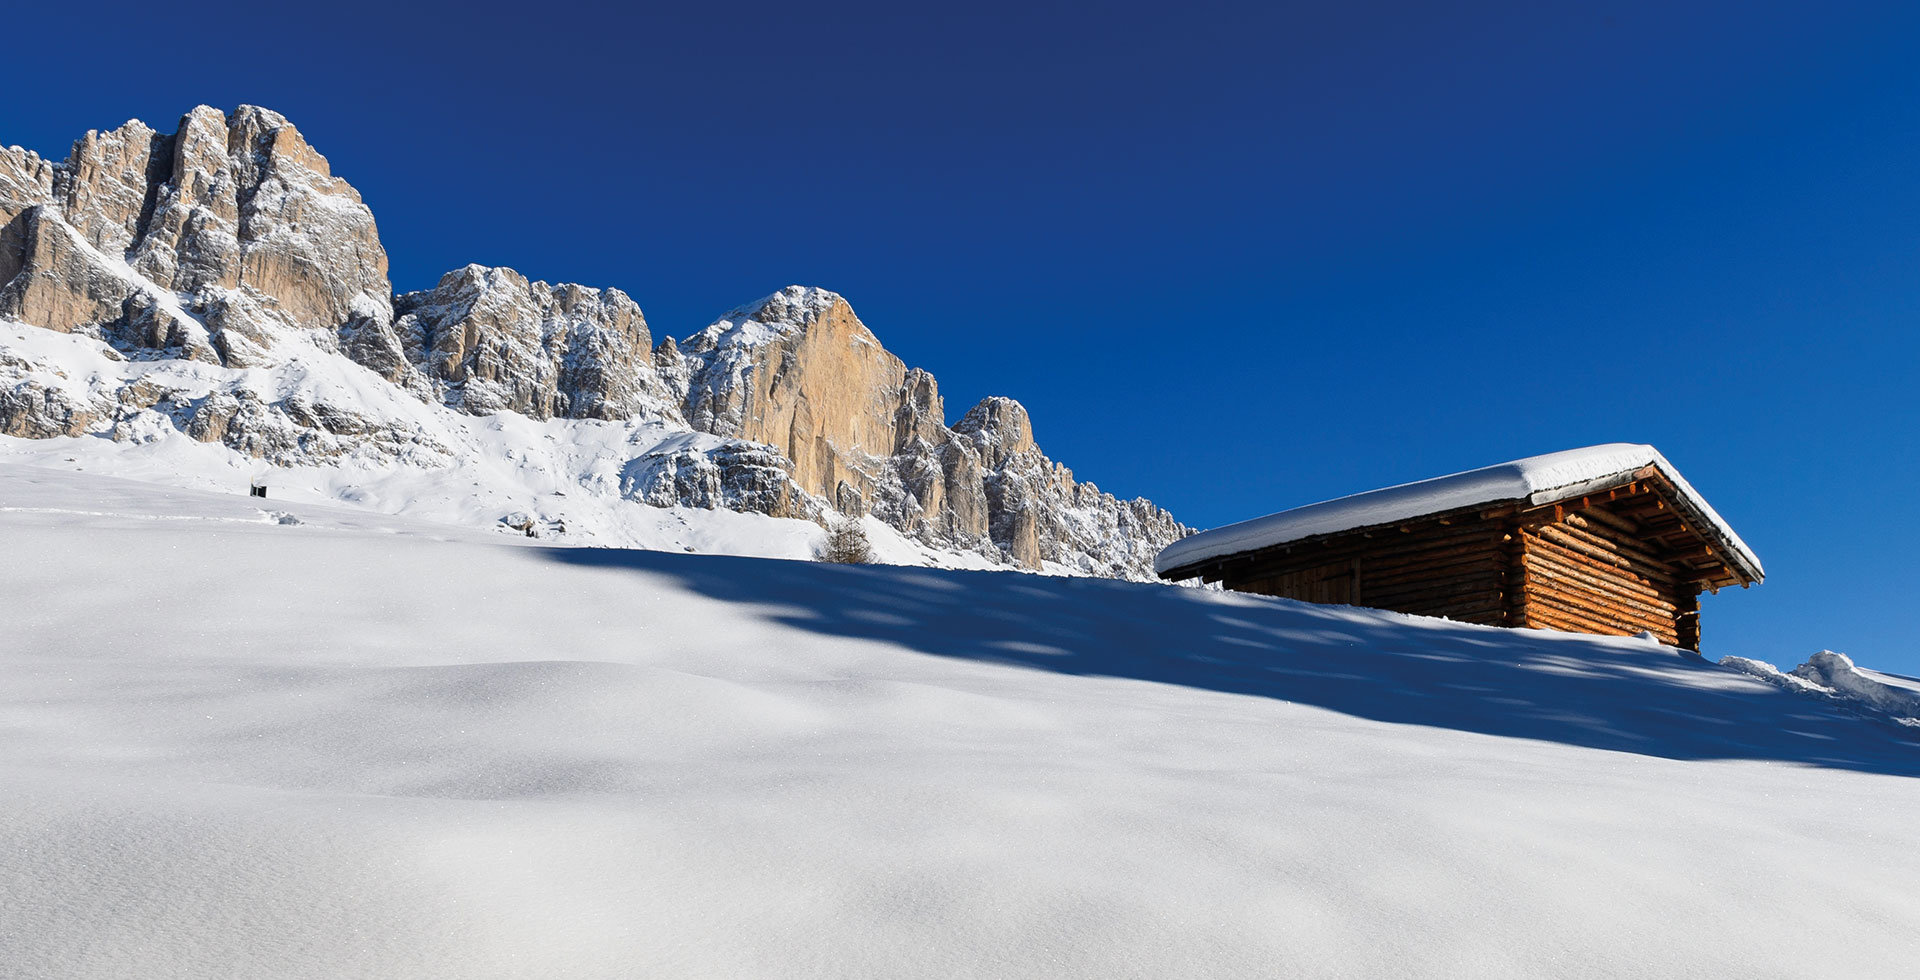 Winter holidays in the Dolomites